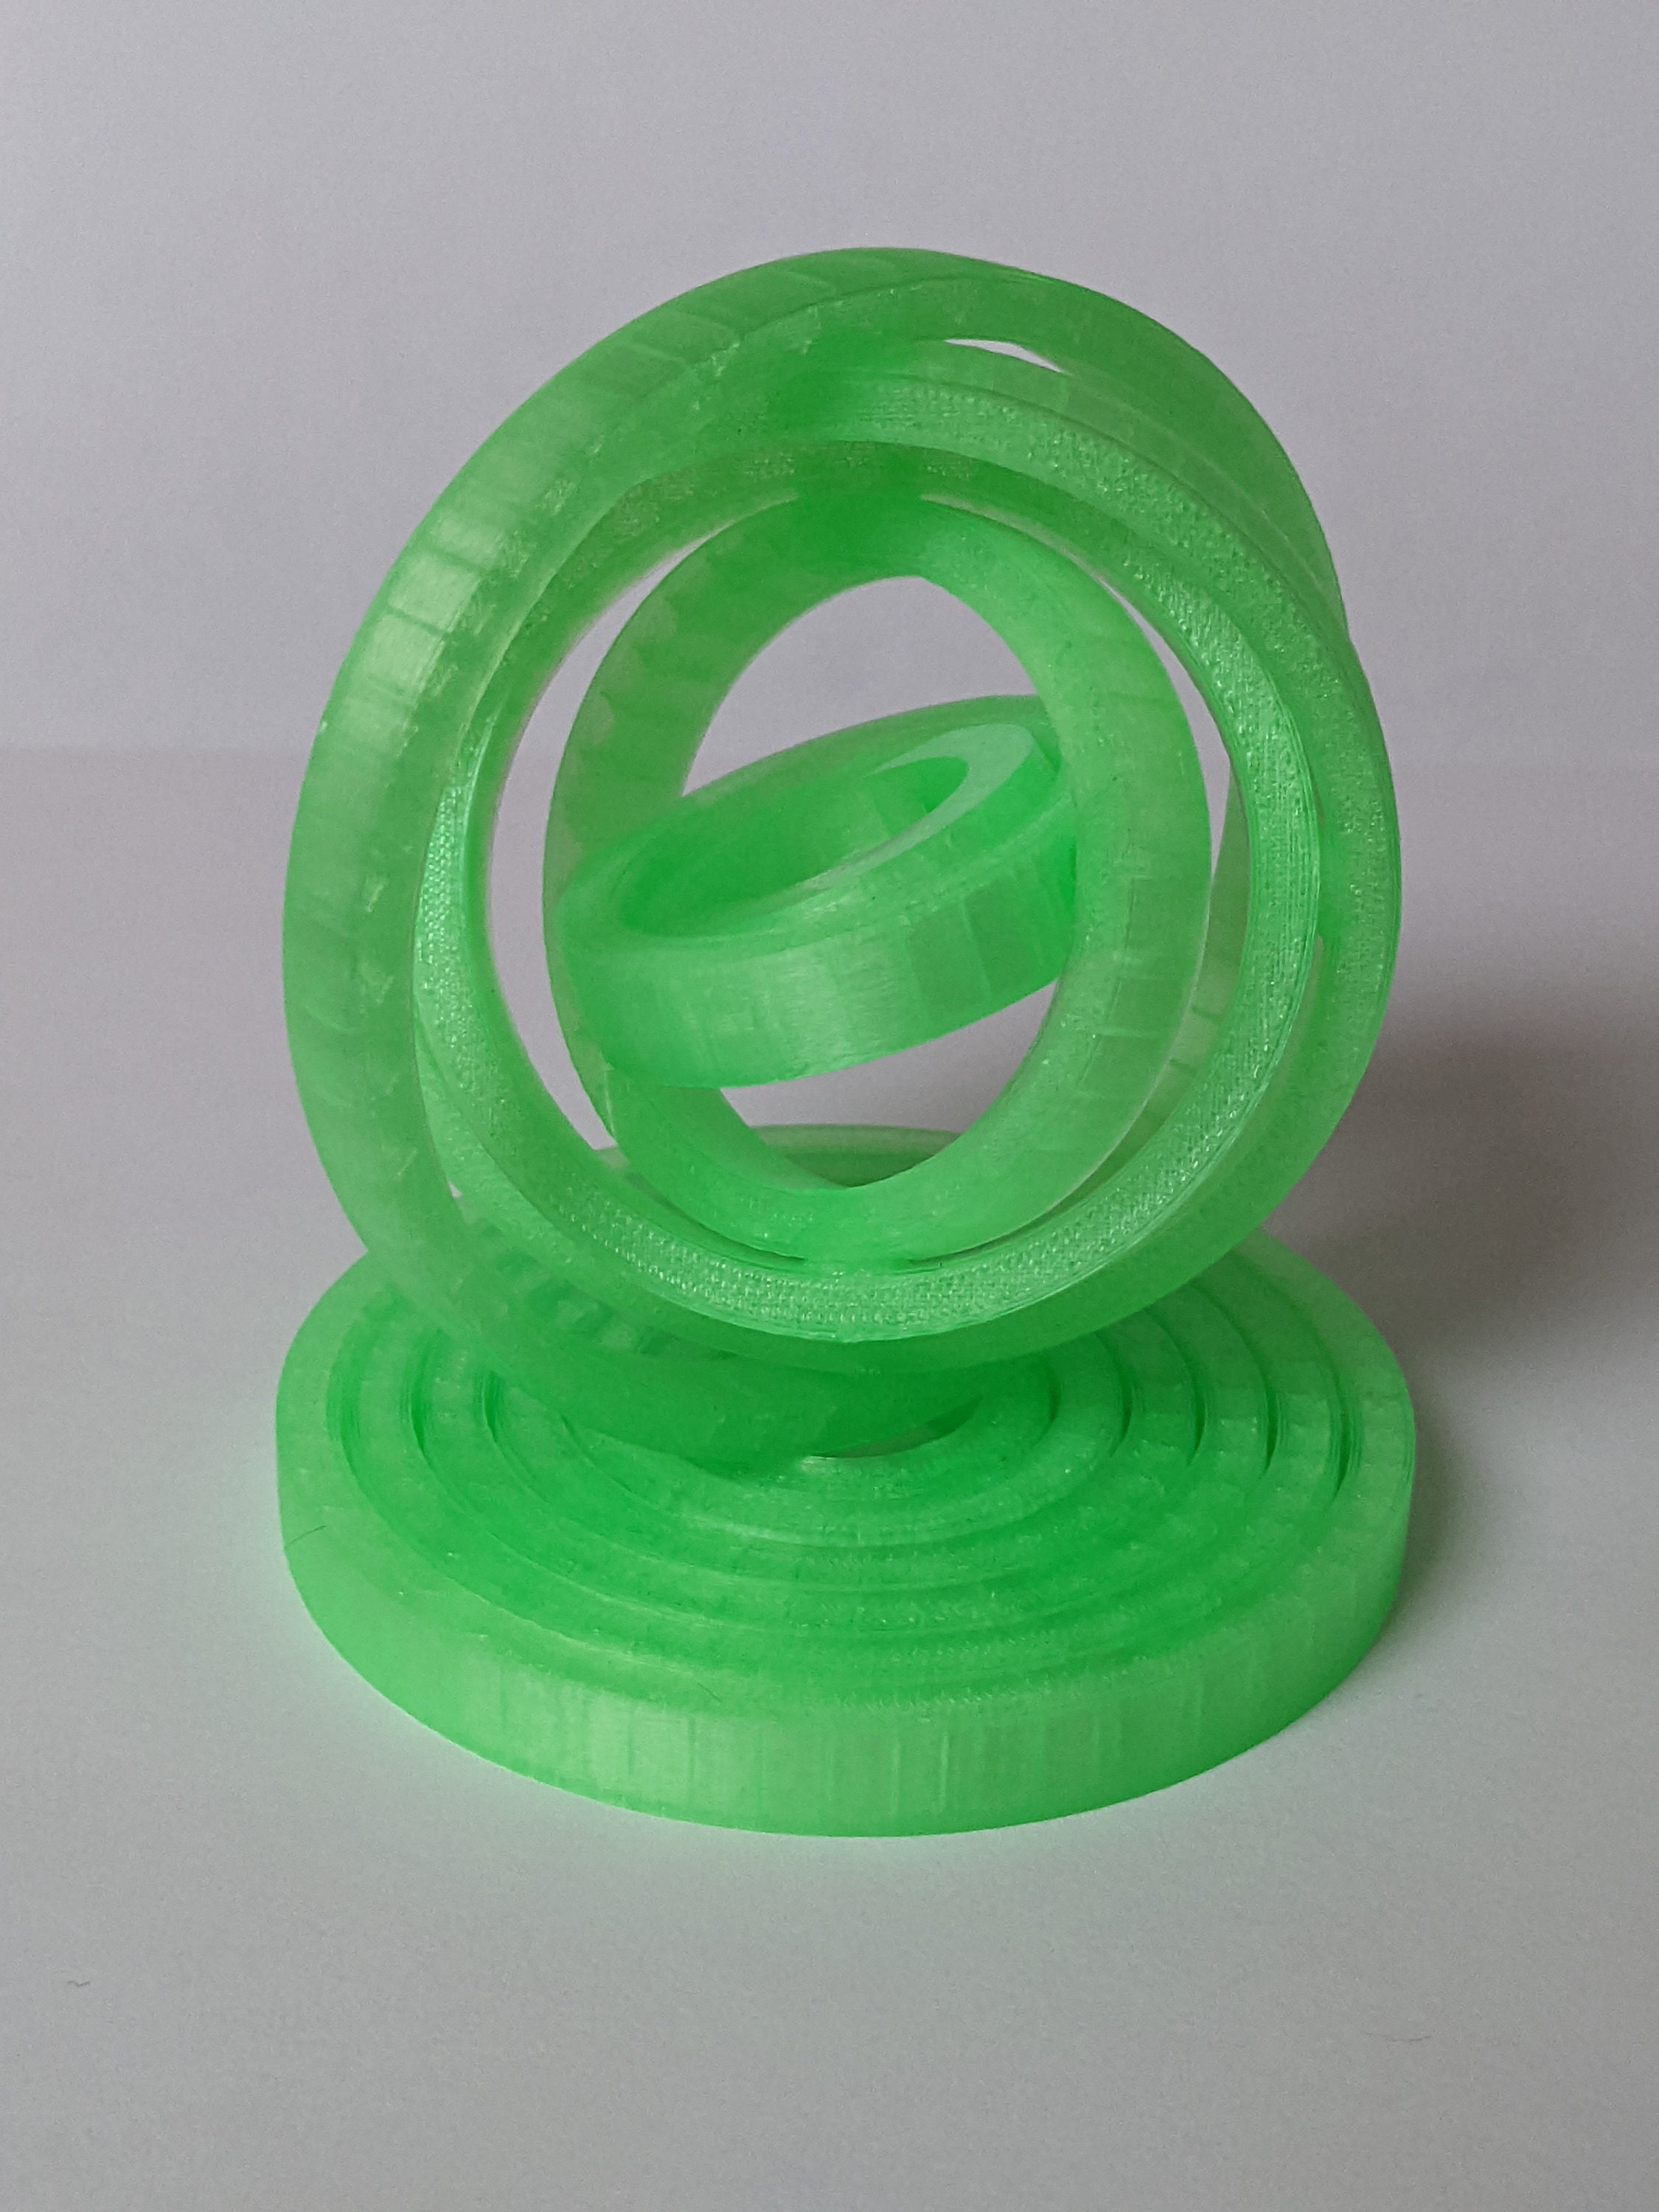 Spinning Gyro, Fidget Spinner, Fidget Toy, Spinning Top, Stress Relief Toy,  Sensory Toy, ADHD Toy, Anxiety Toy, Worry Toy, 3D Print 